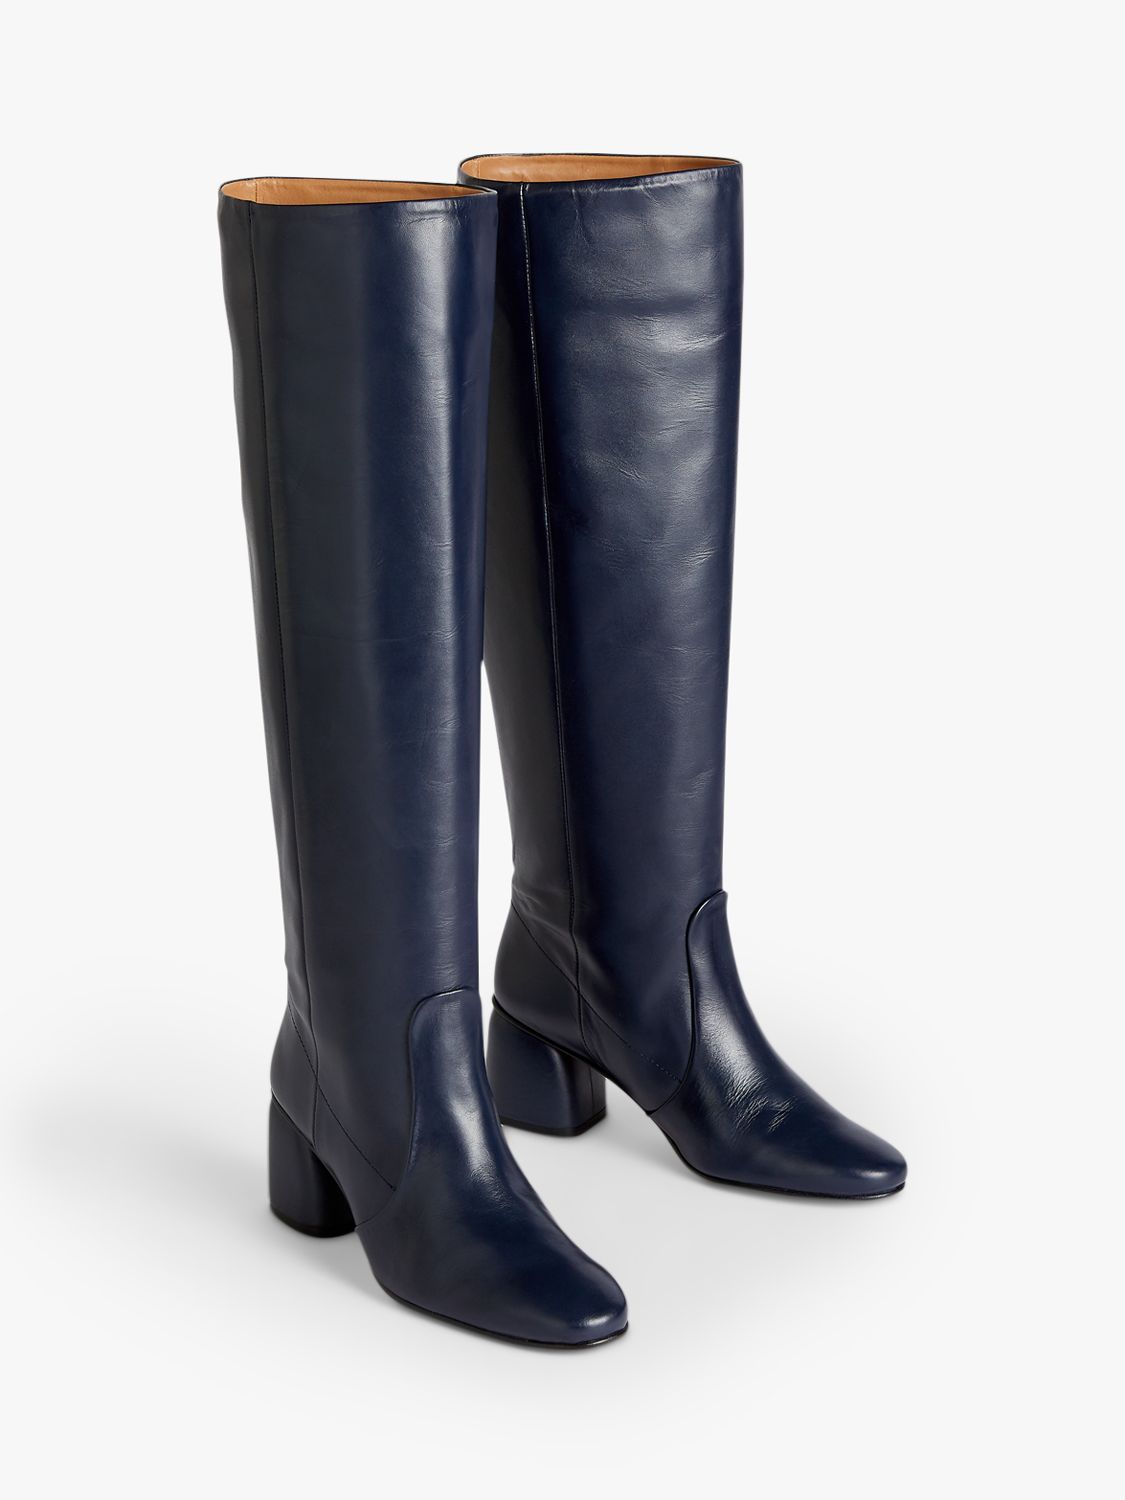 navy knee high boots leather